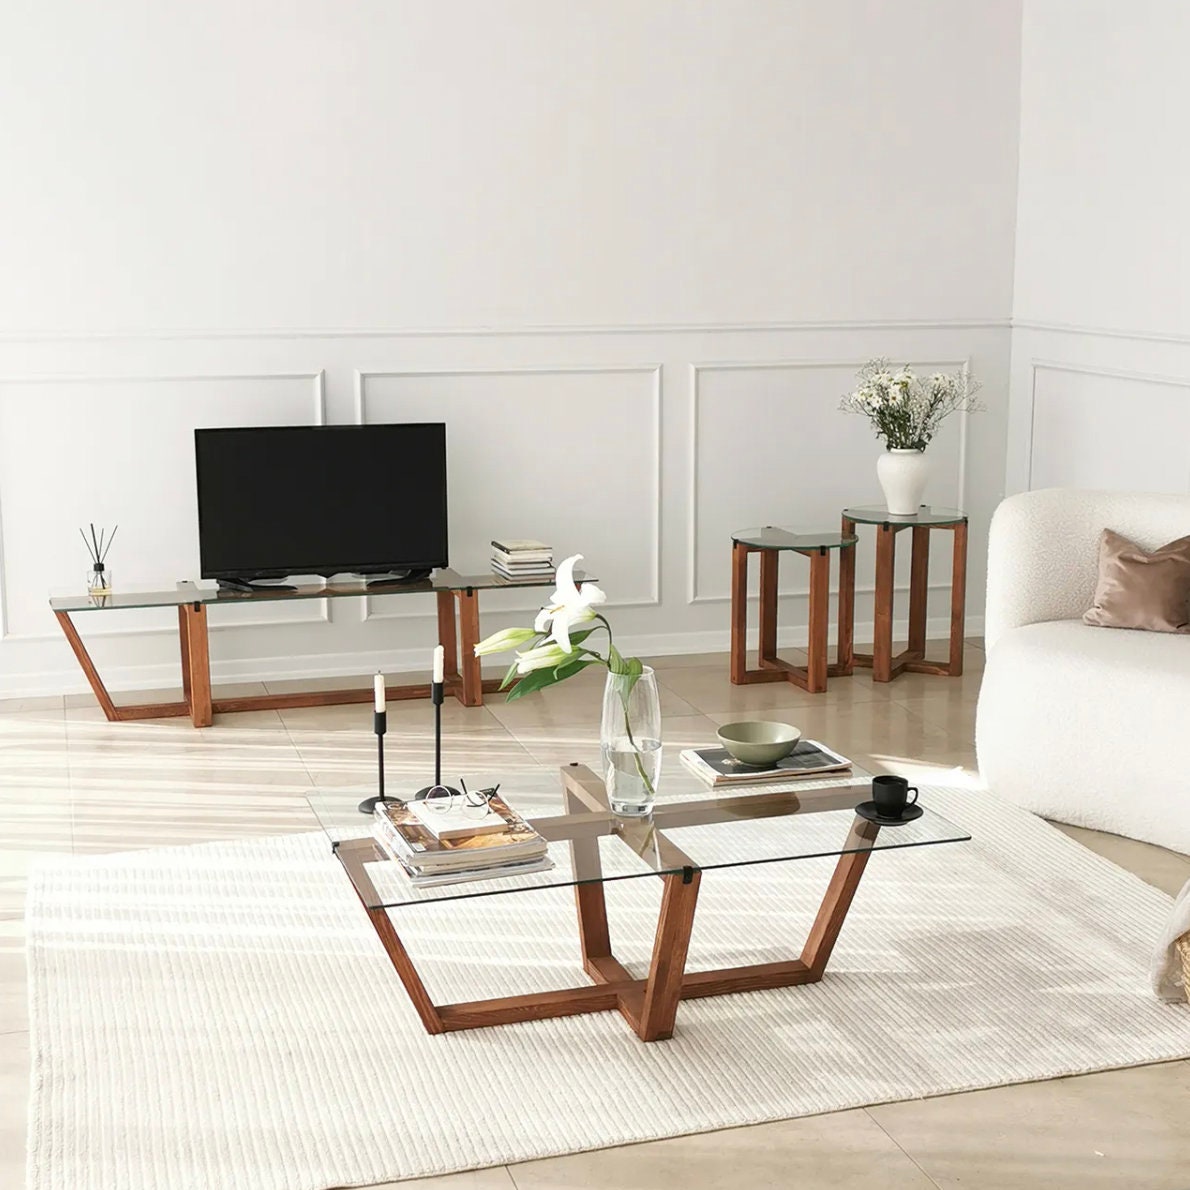 Wholesale Minimal style solid wood coffee table with glass top for living  room rectangle light coffee table From m.